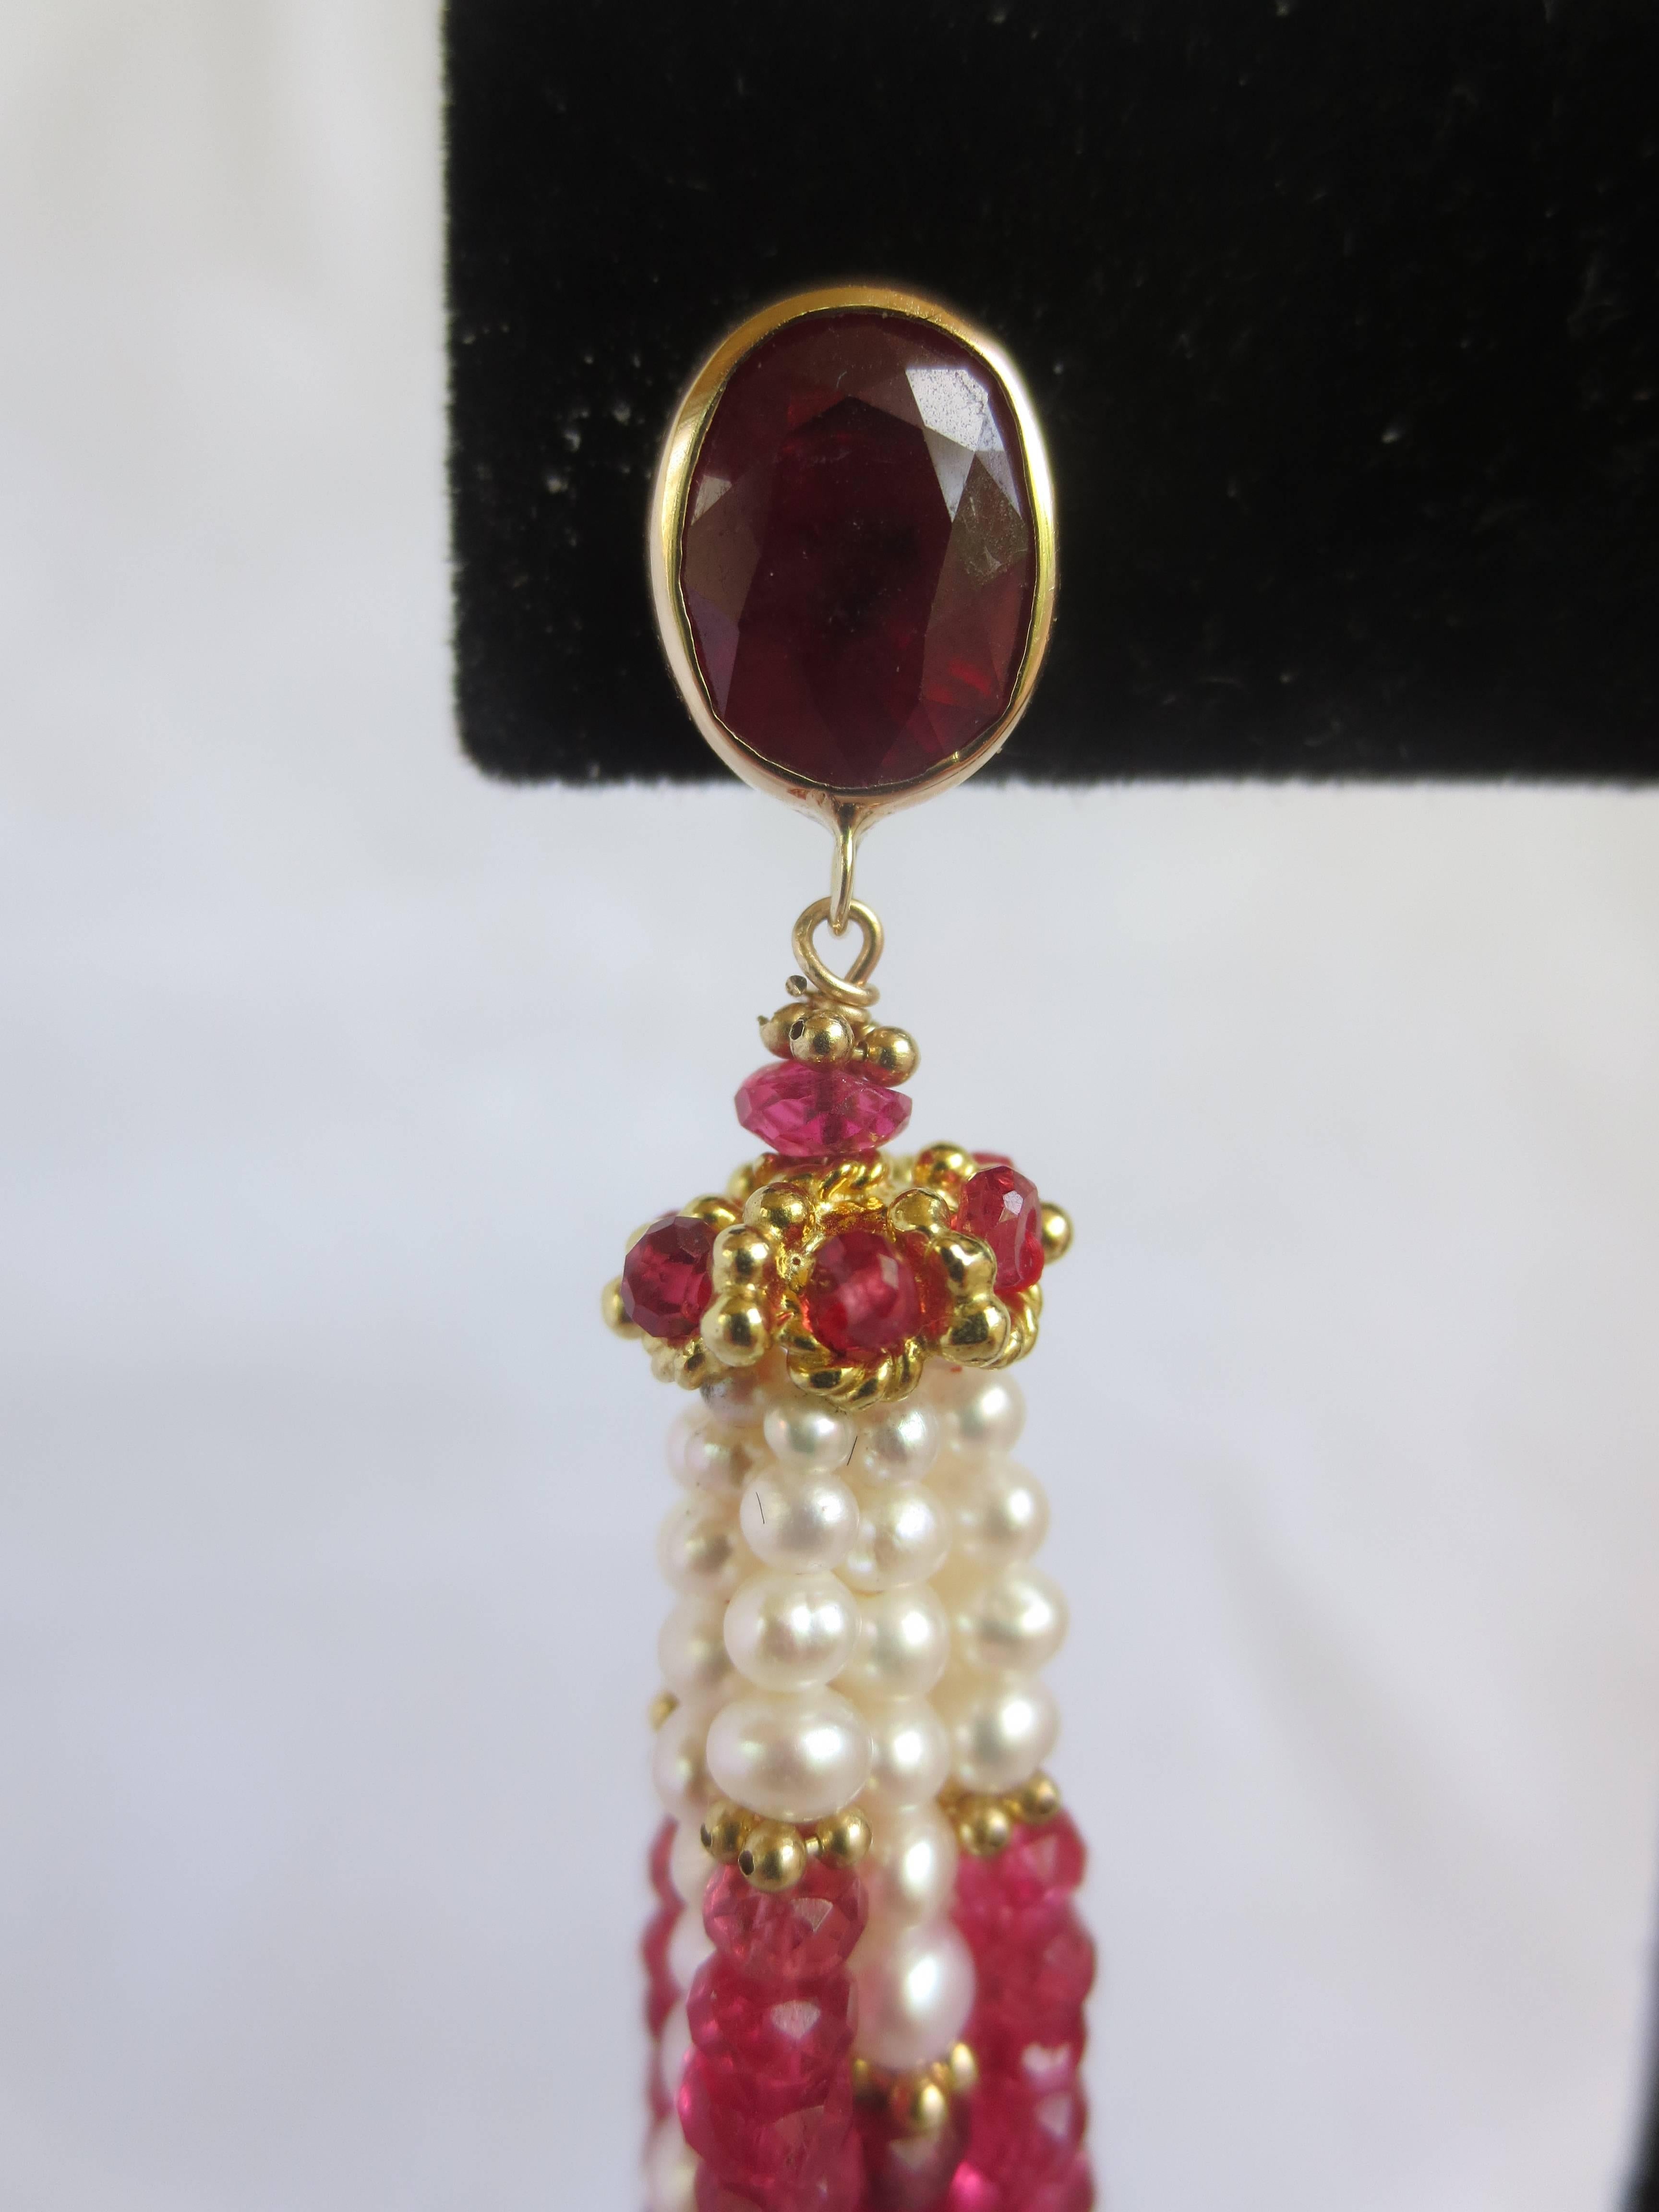 This colorful and unique pair of earrings are an exclusive design from Marina J.

Starting with a large (6 mm X 9 mm) and luscious faceted Ruby stone framed in 14 K Yellow Gold, these earrings will sit close and snug by using a Gold post instead